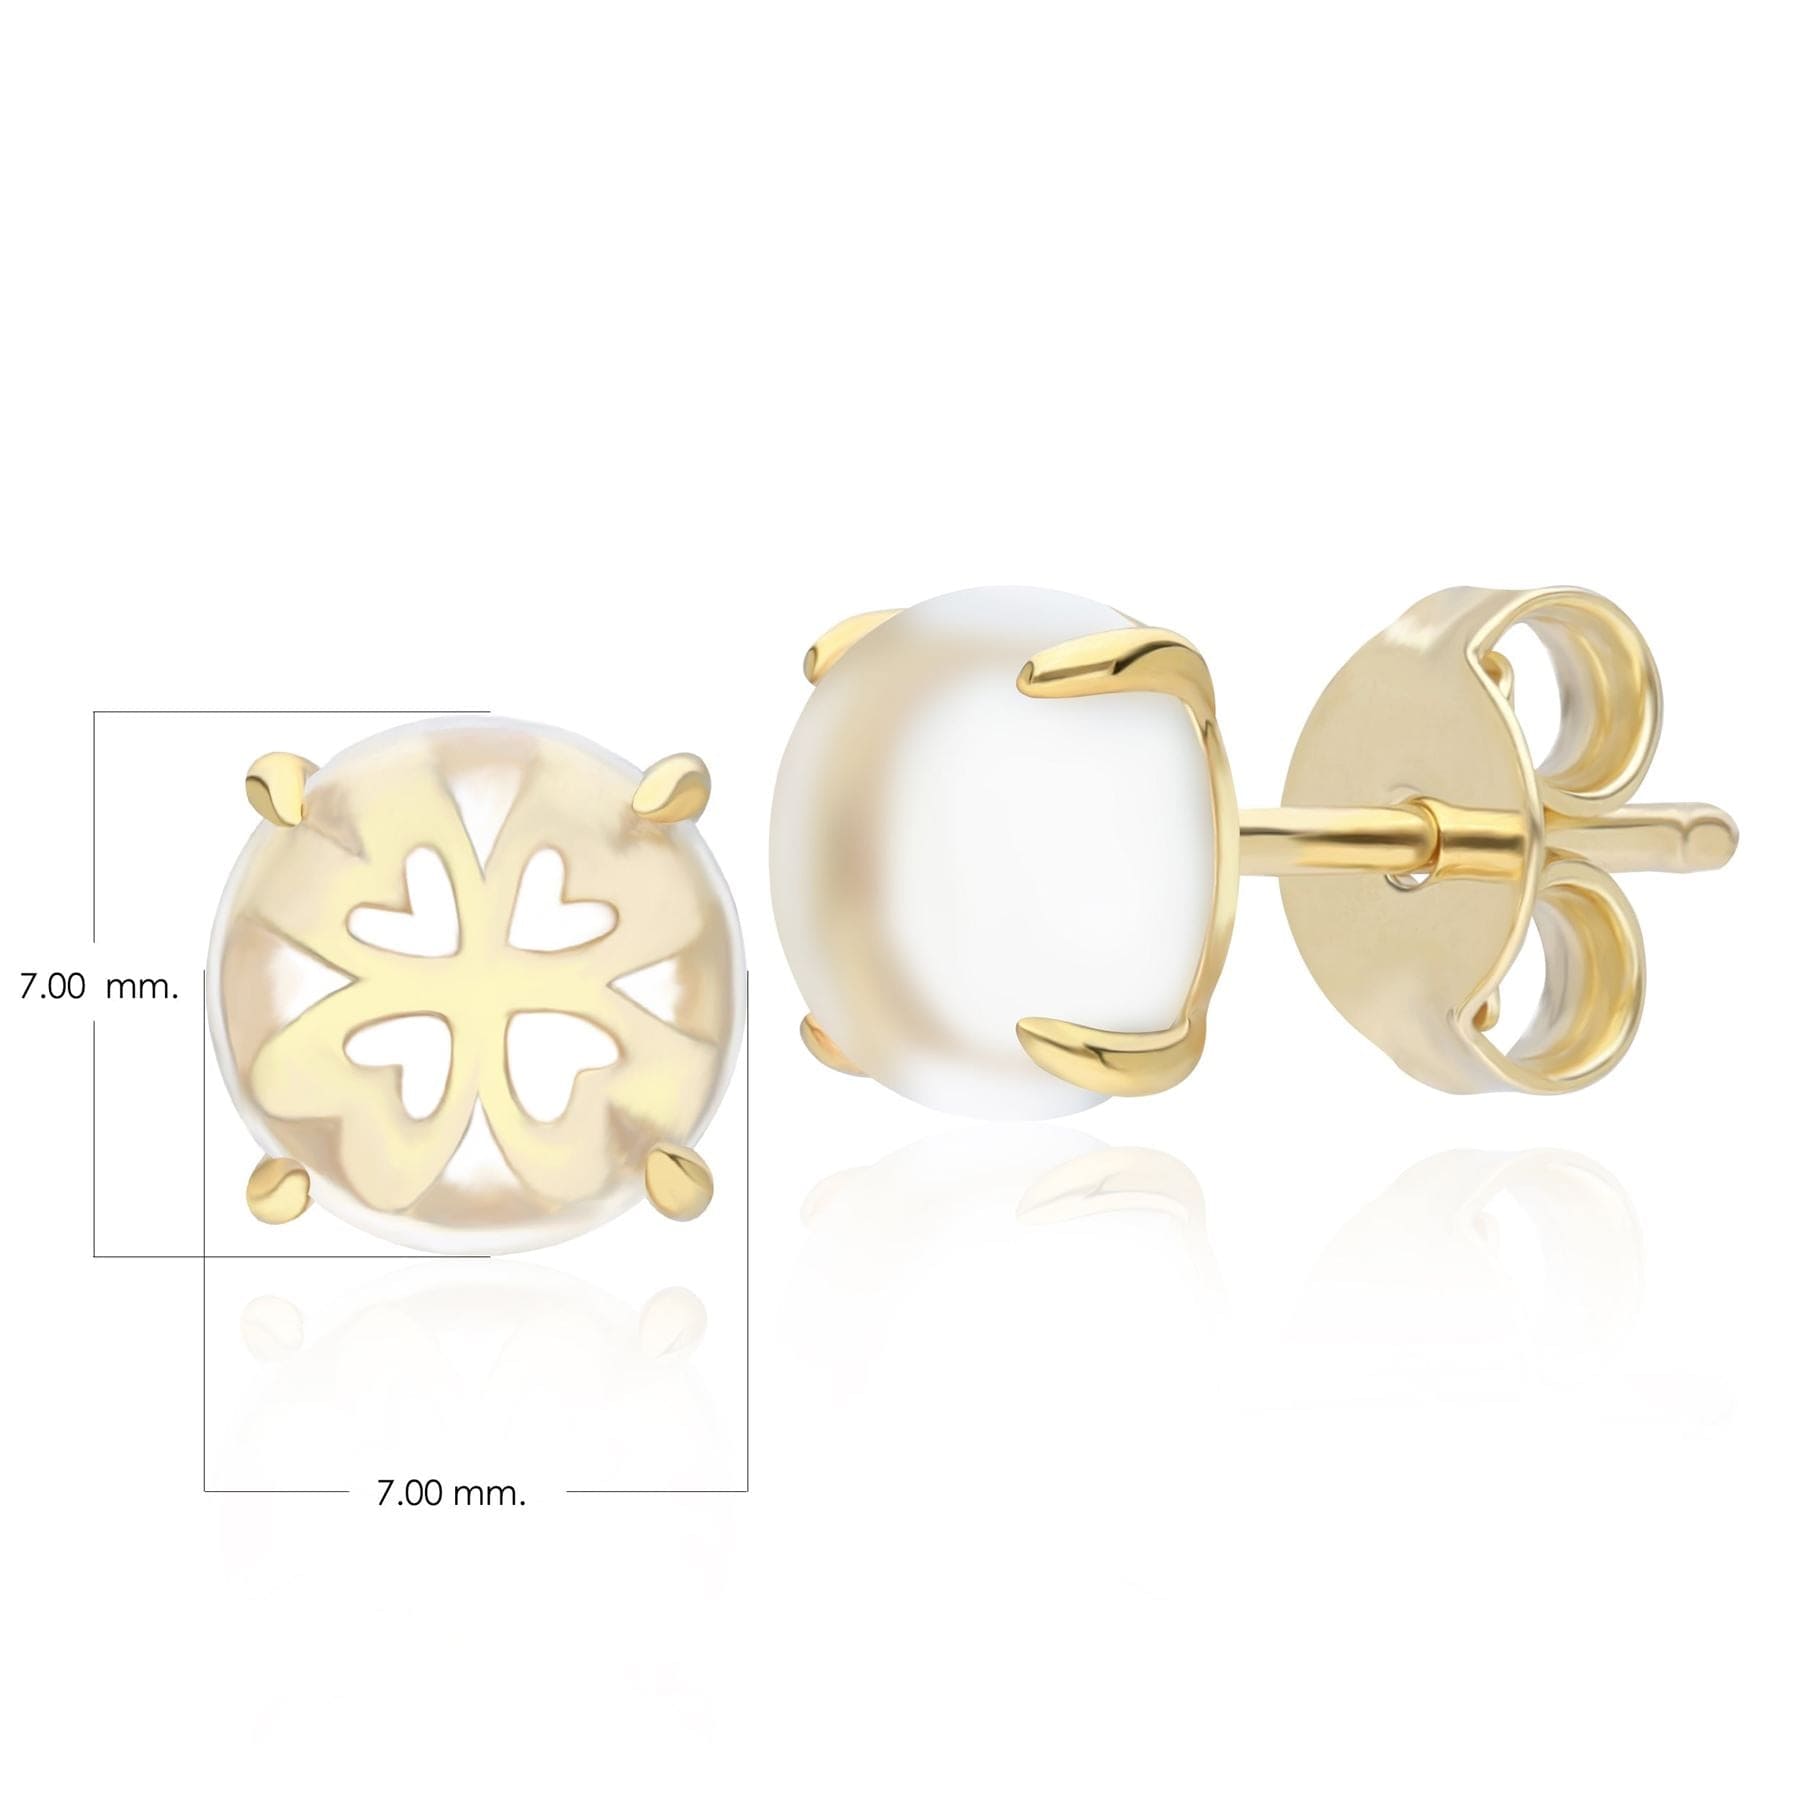 253E391801925 Gardenia Rock Crystal Cabochon Stud Earrings in Gold Plated Sterling Silver Dimensions